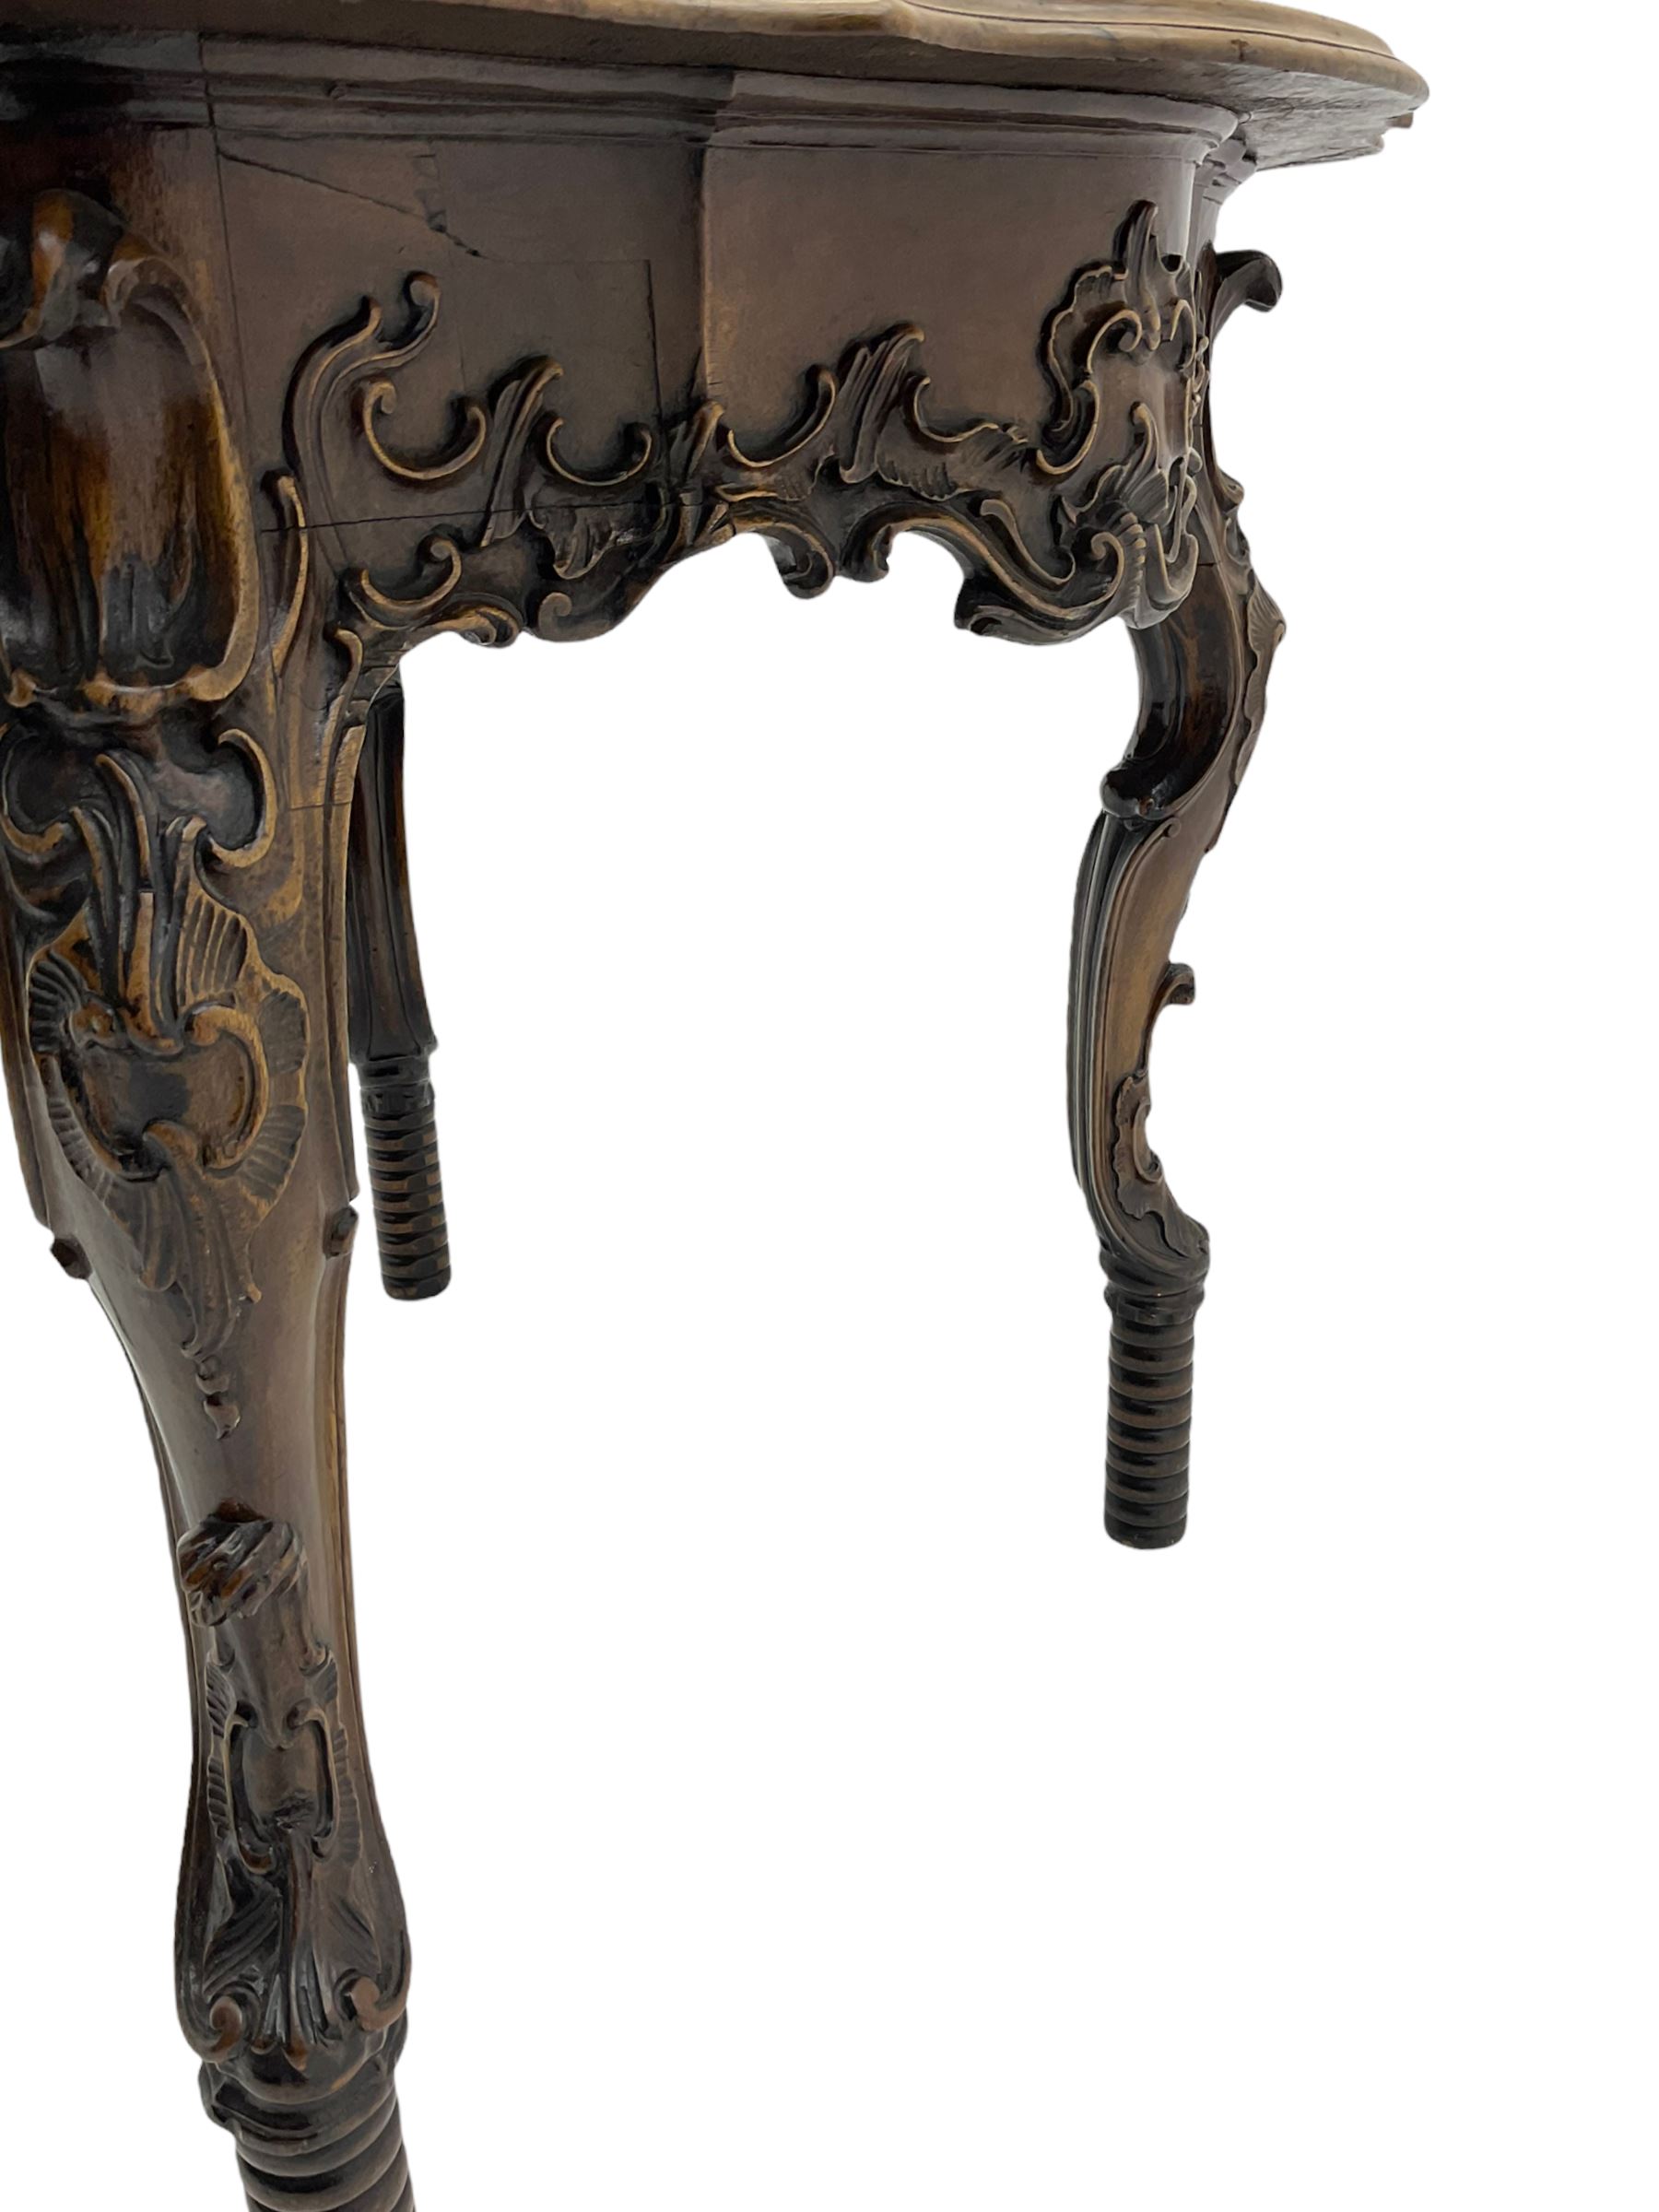 19th century walnut centre table - Image 7 of 9